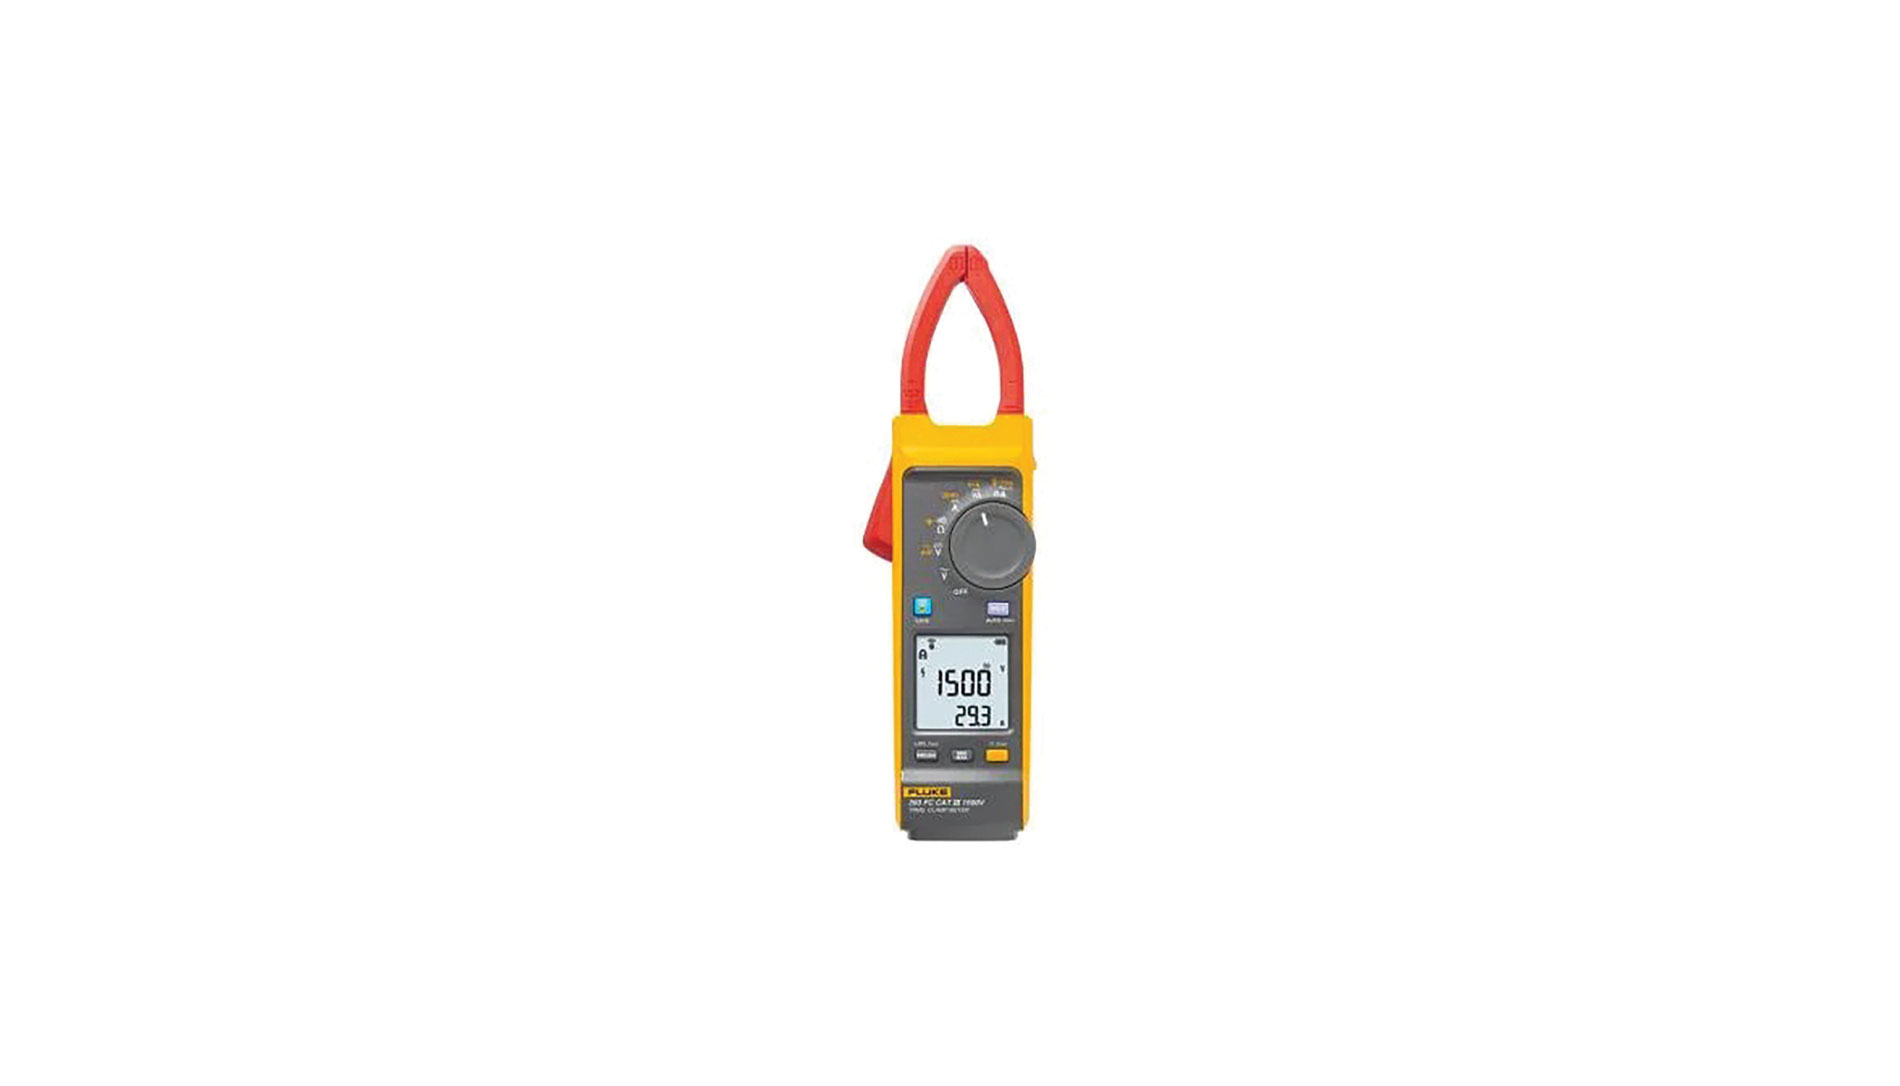 Red, gray and yellow clamp meter with digital readout. Image by Fluke.